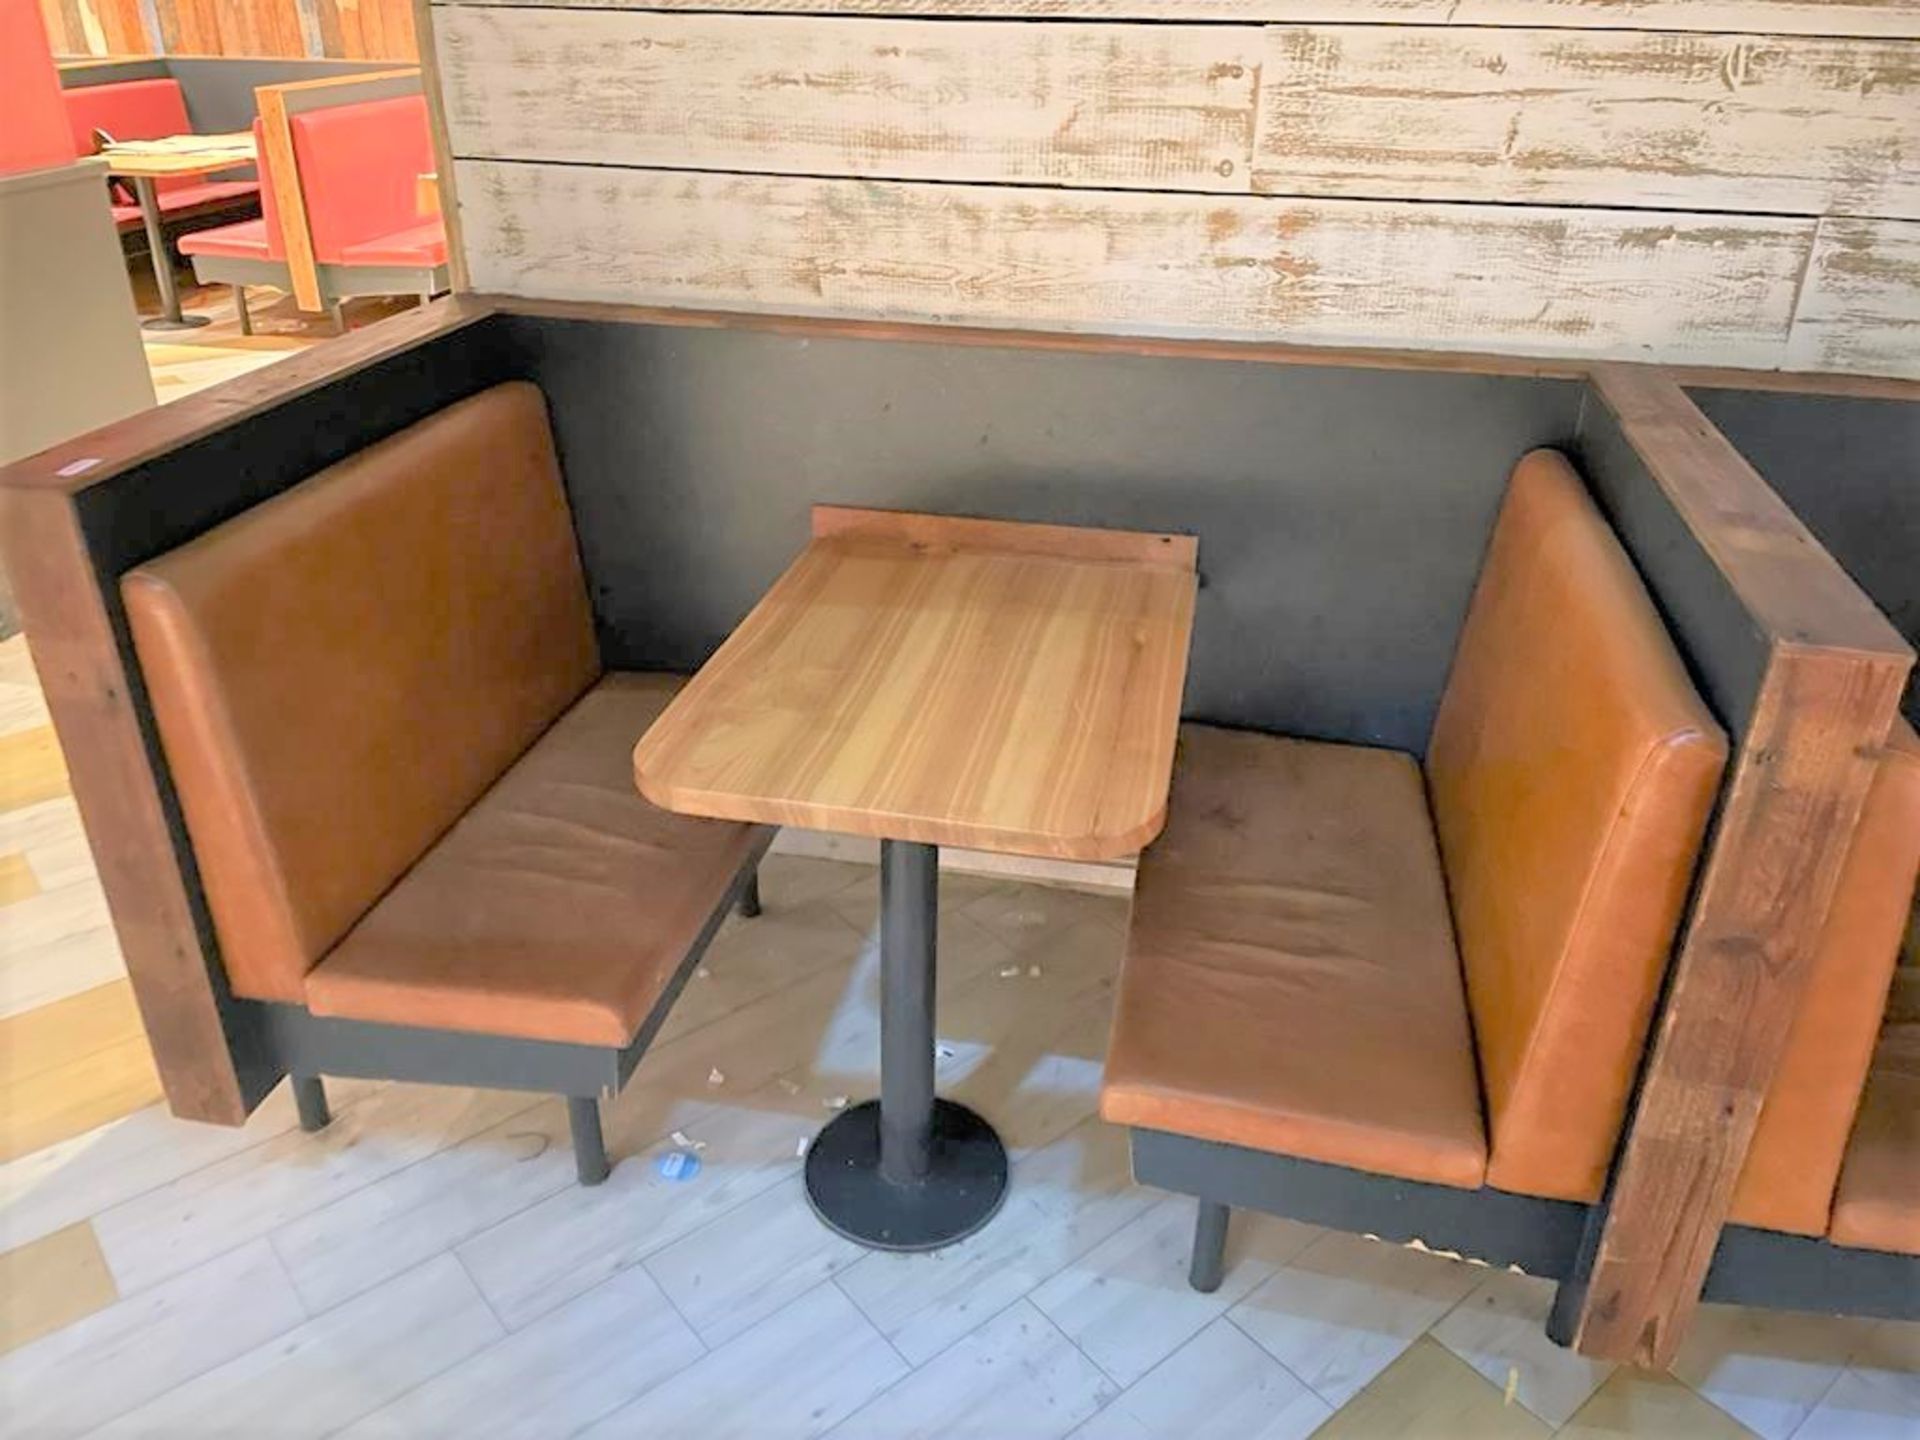 3 x Restaurant Leather Seating Booths With Oak Tables - Includes 4 x Seating Benches Upholstered - Image 3 of 4